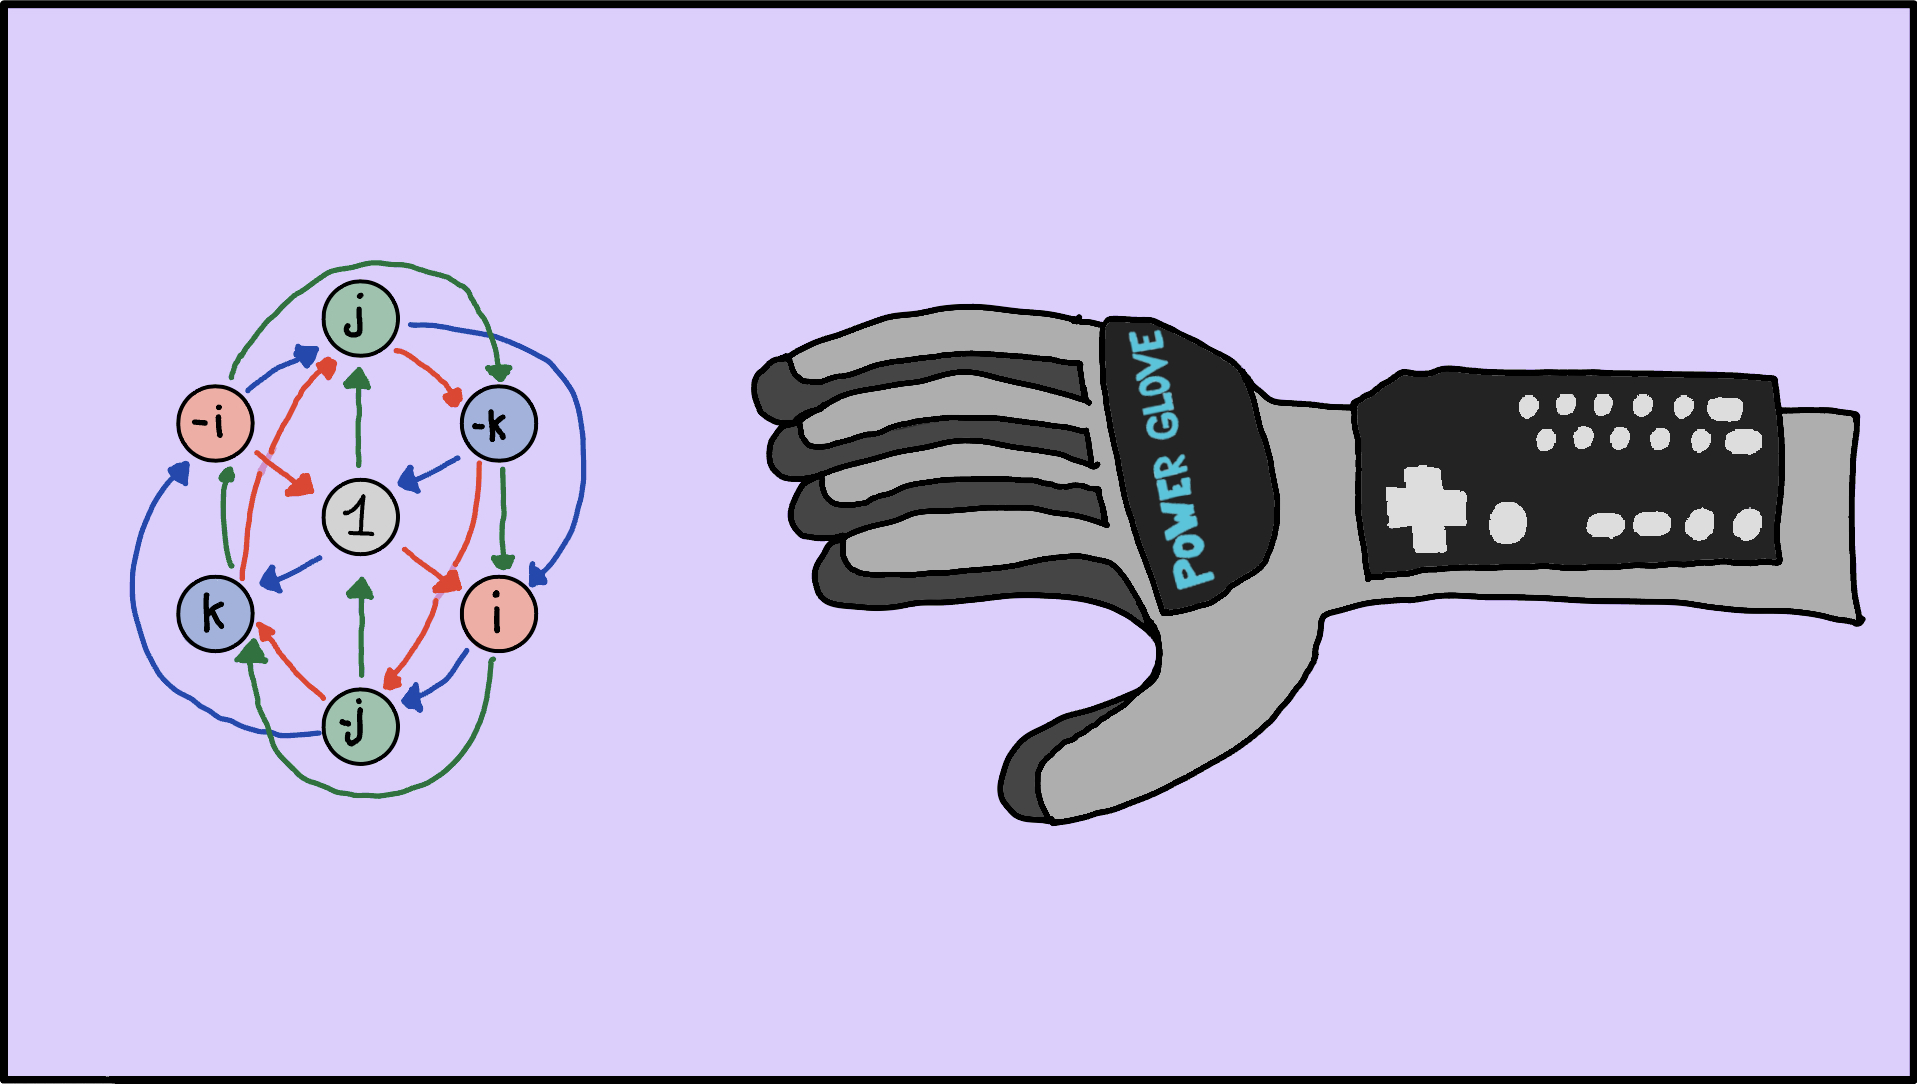 Power Glove and Quaternions